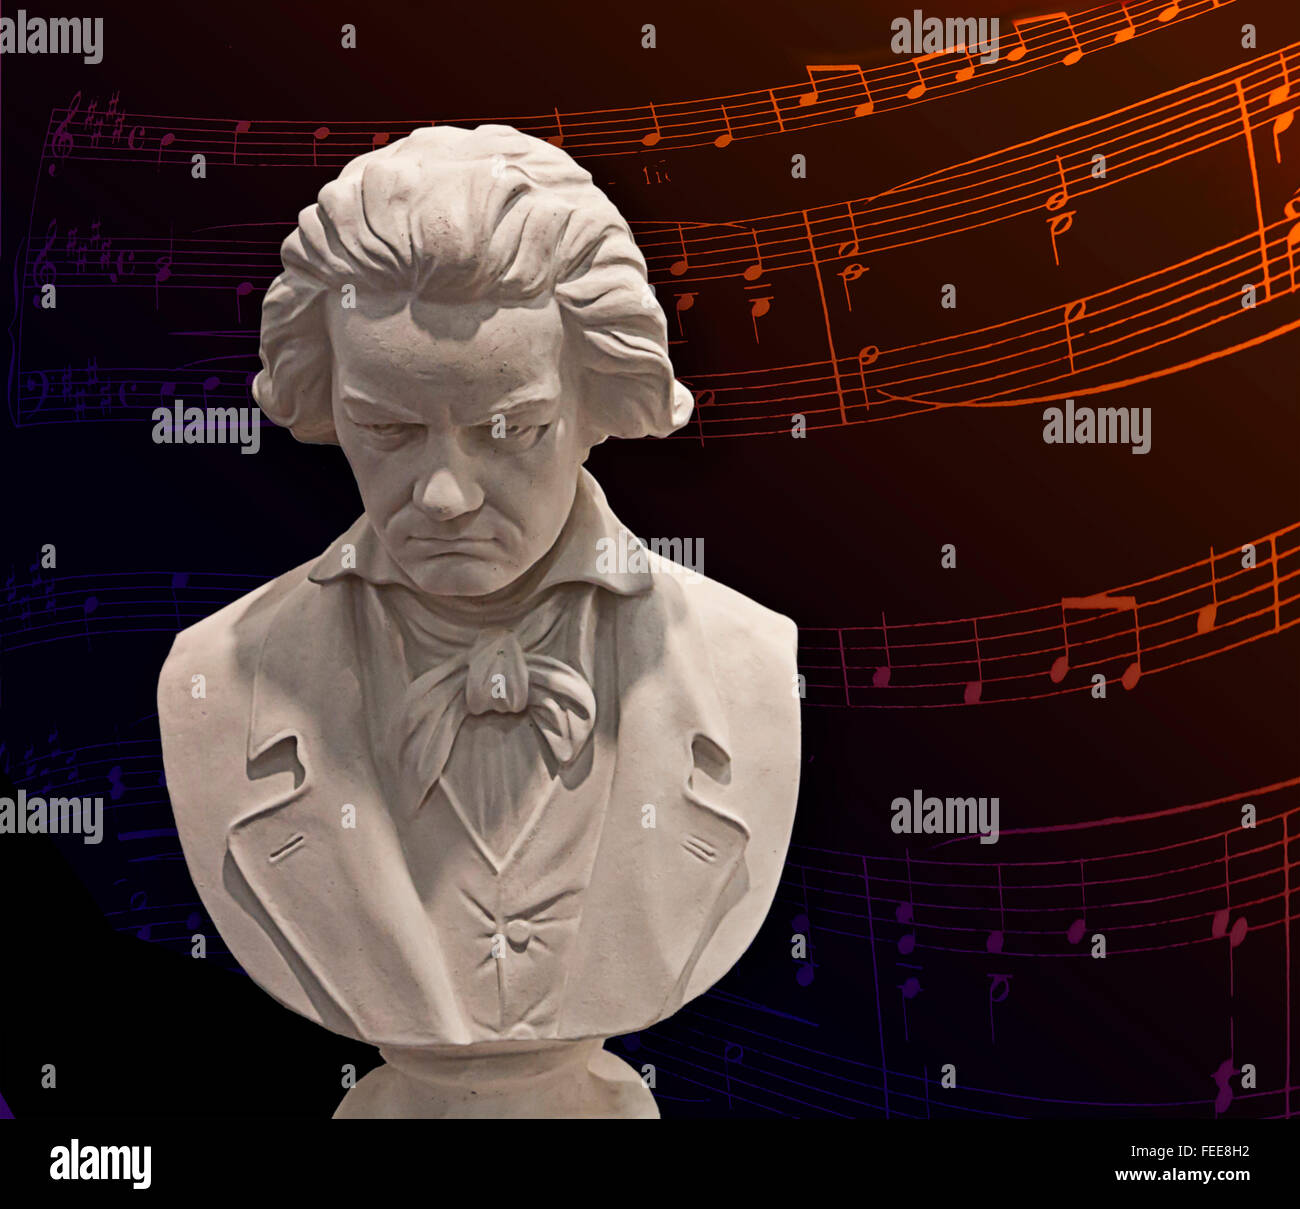 Marble bust of Ludwig van Beethoven,German composer on dark background with musical notes Stock Photo